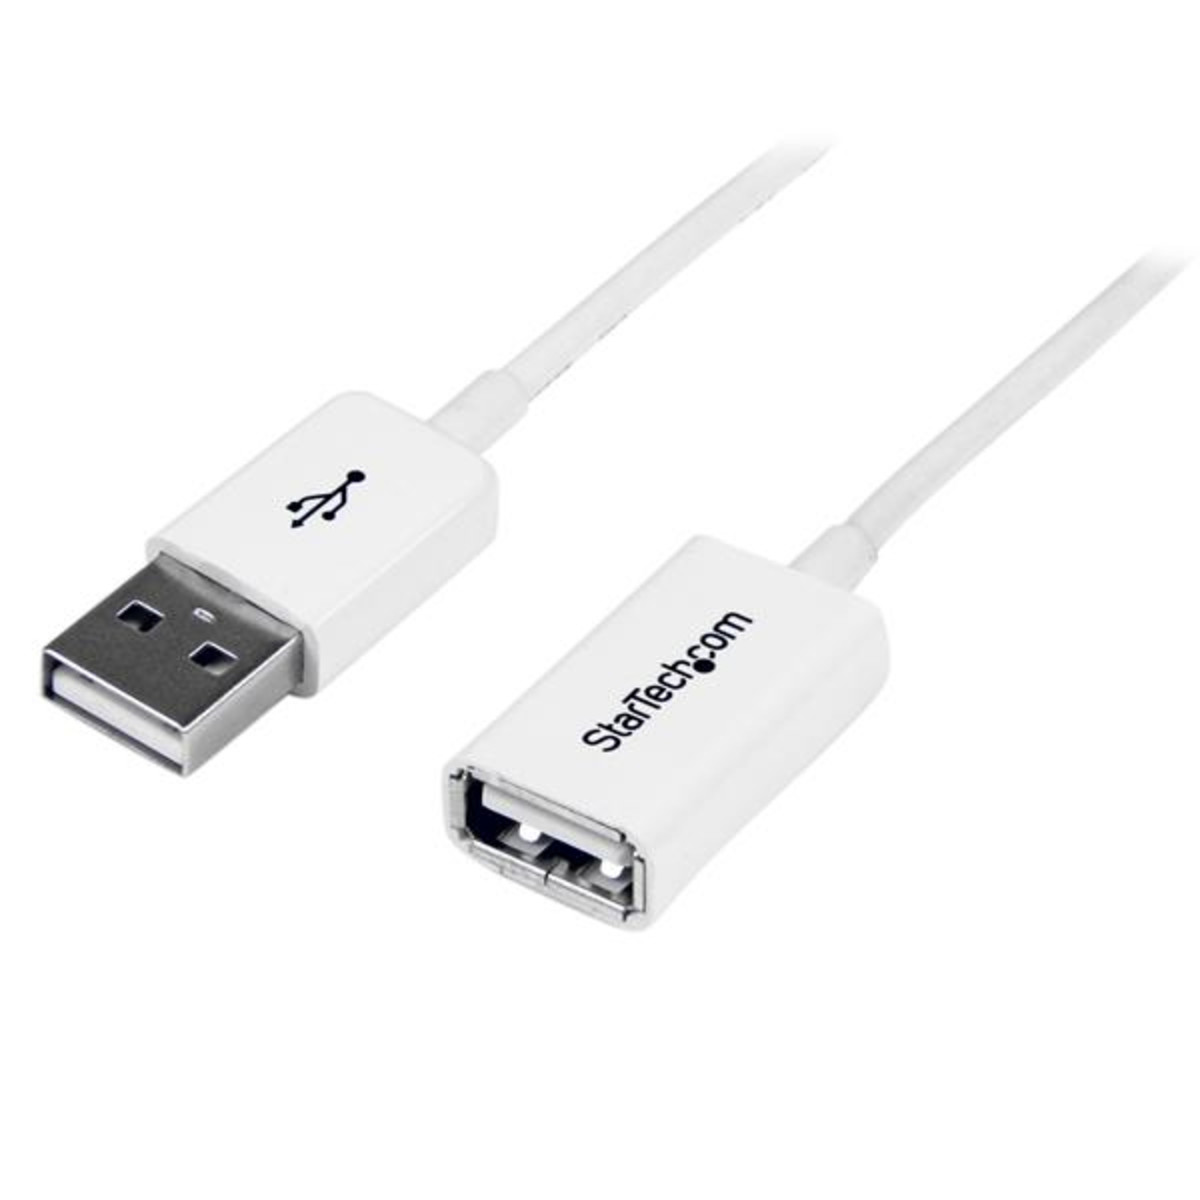 1m USB 2.0 Extension Cable A to A